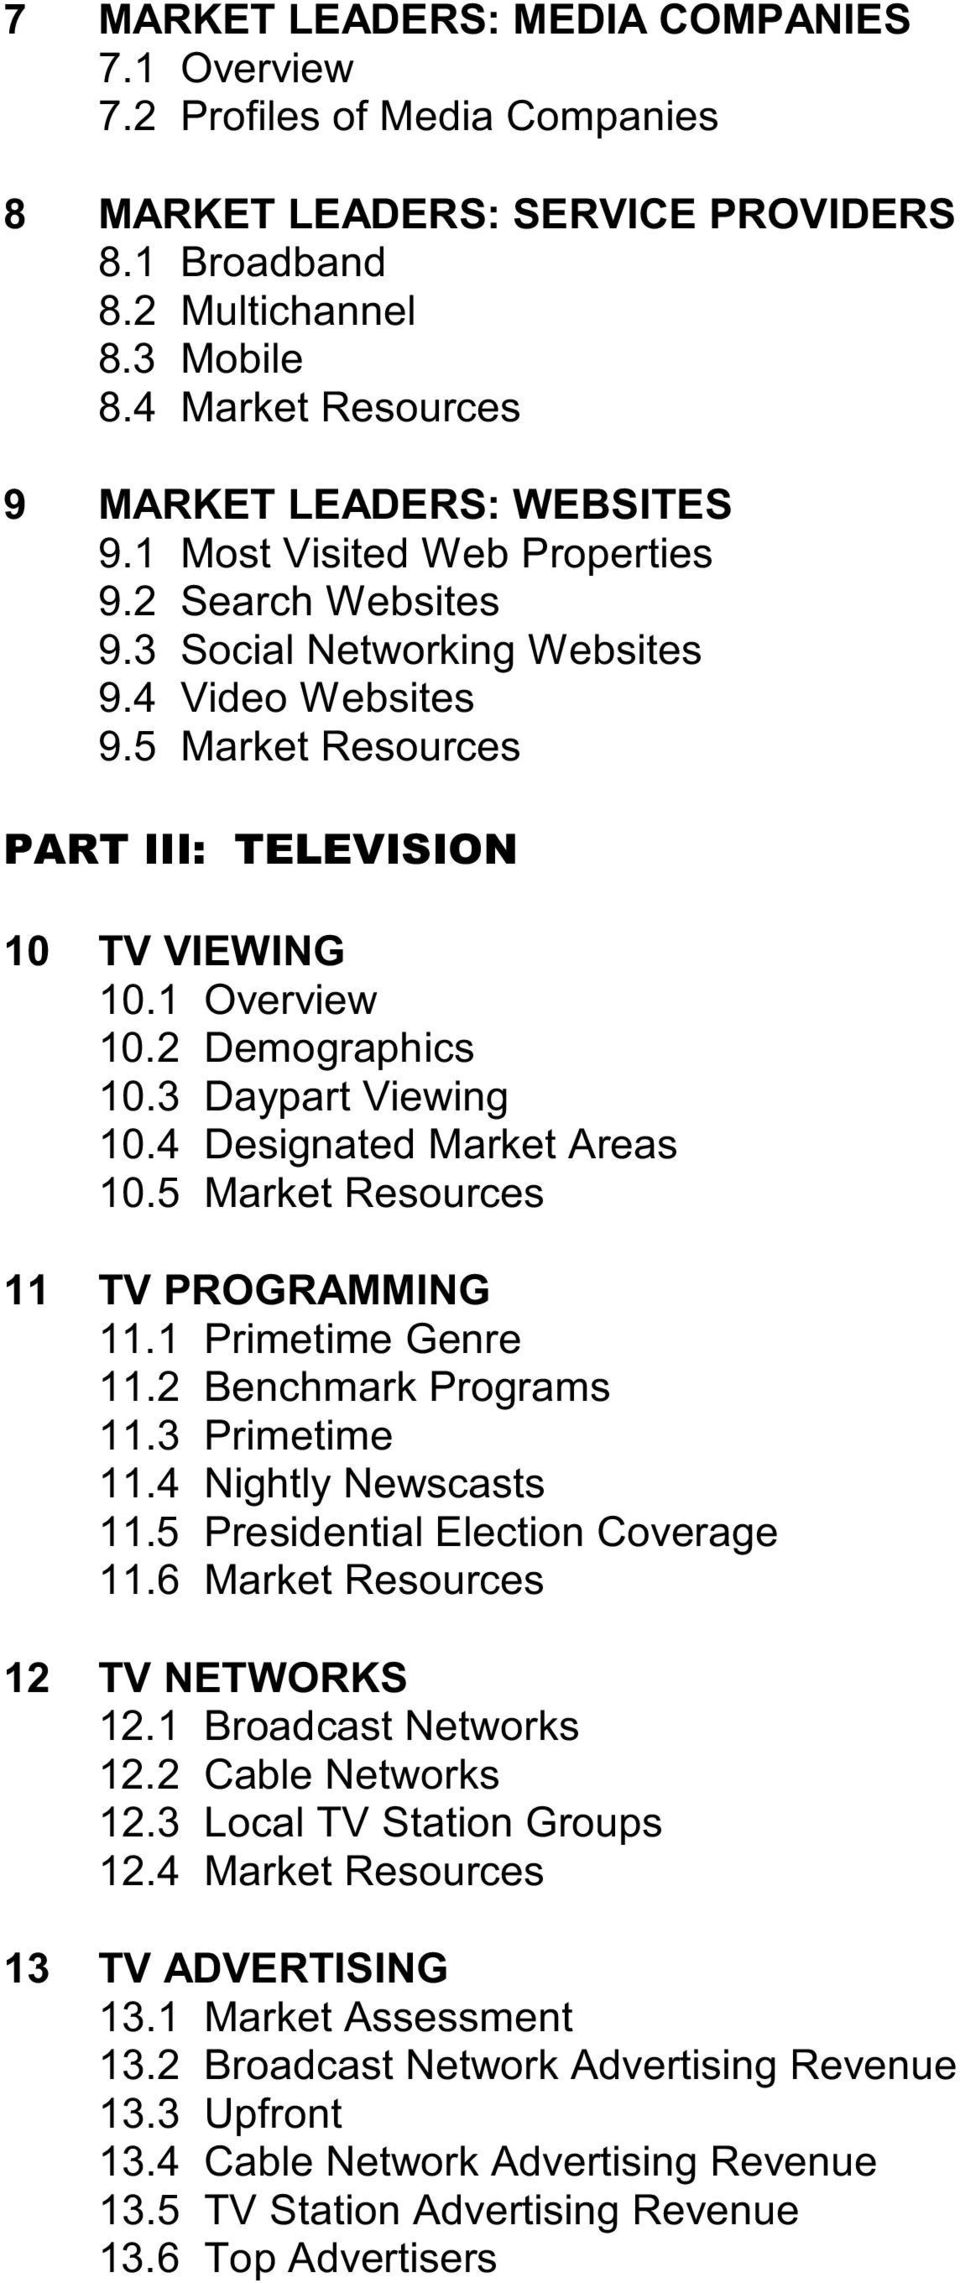 5 Market Resources PART III: TELEVISION 10 TV VIEWING 10.1 Overview 10.2 Demographics 10.3 Daypart Viewing 10.4 Designated Market Areas 10.5 Market Resources 11 TV PROGRAMMING 11.1 Primetime Genre 11.